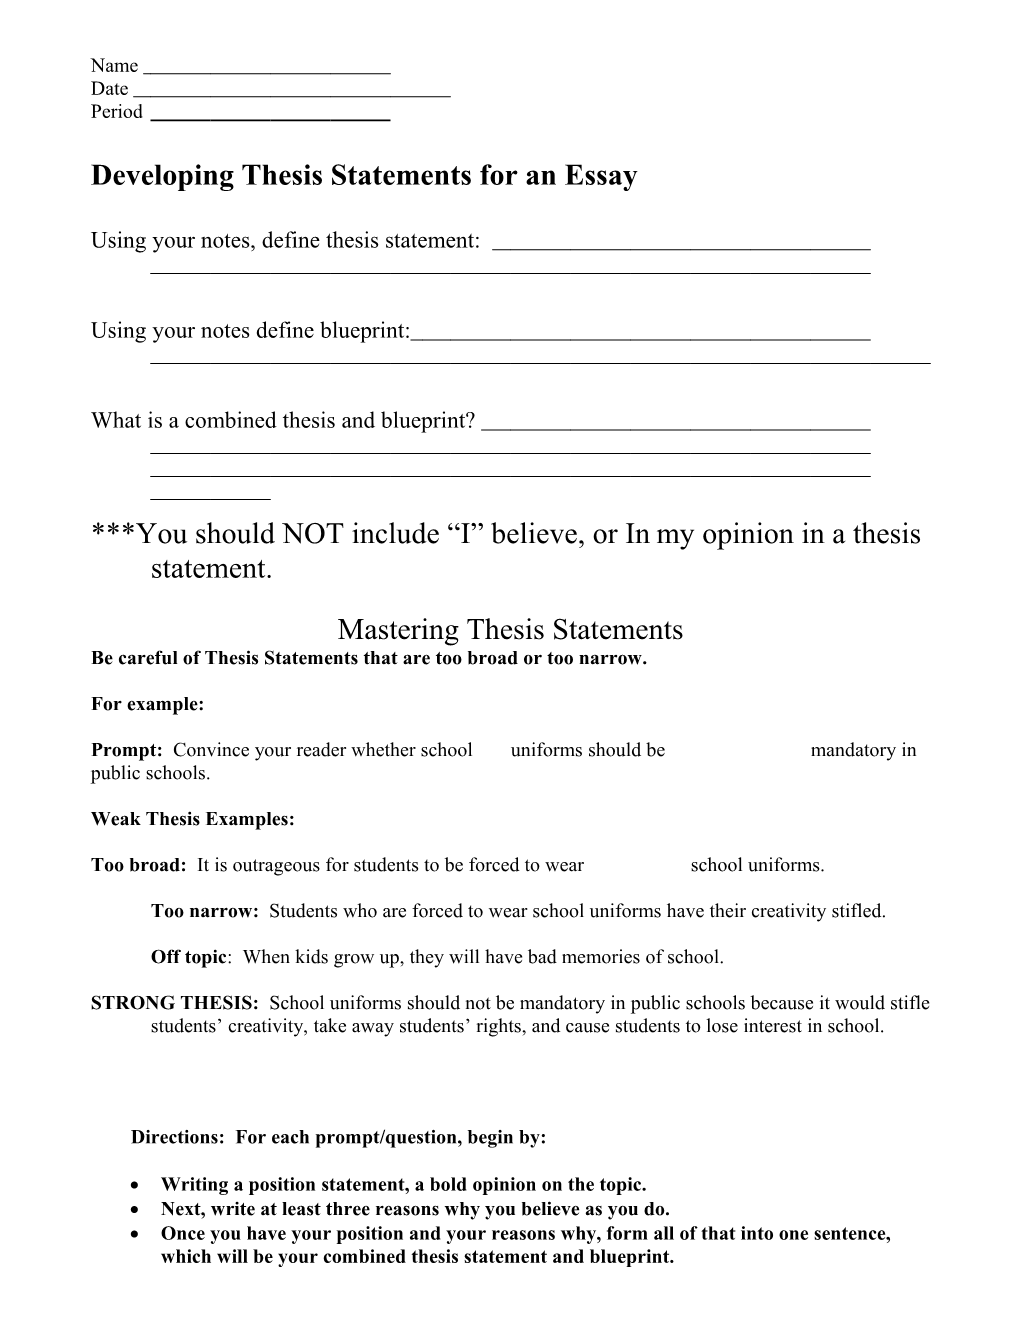 Developing Thesis Statements for a Persuasive Essay